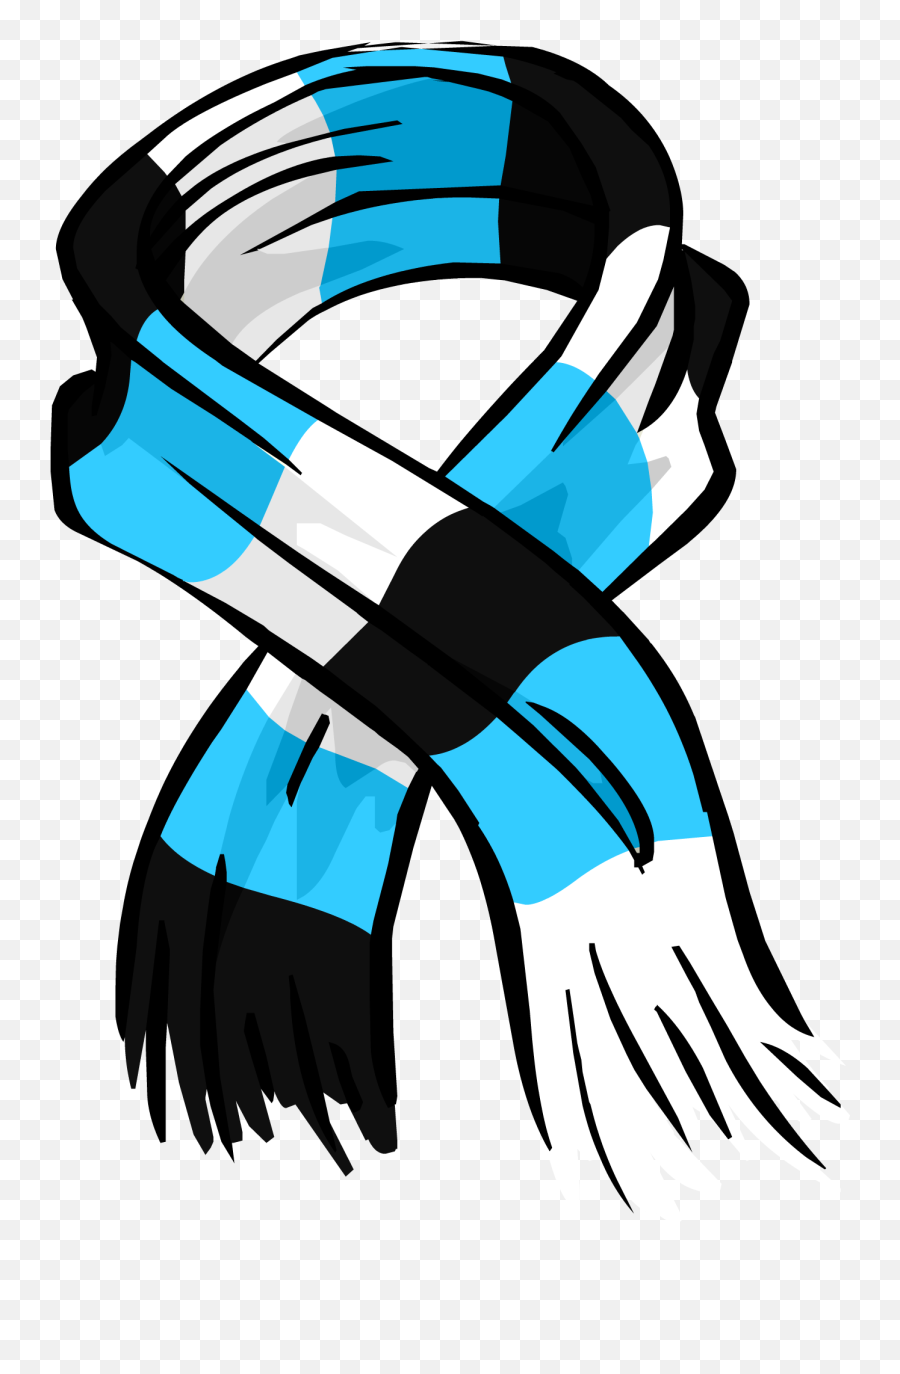 Scarf Clipart Dancing - Club Penguin Scarf Png Download Scarf Clipart Png Emoji,Dancing Emojis Wiki